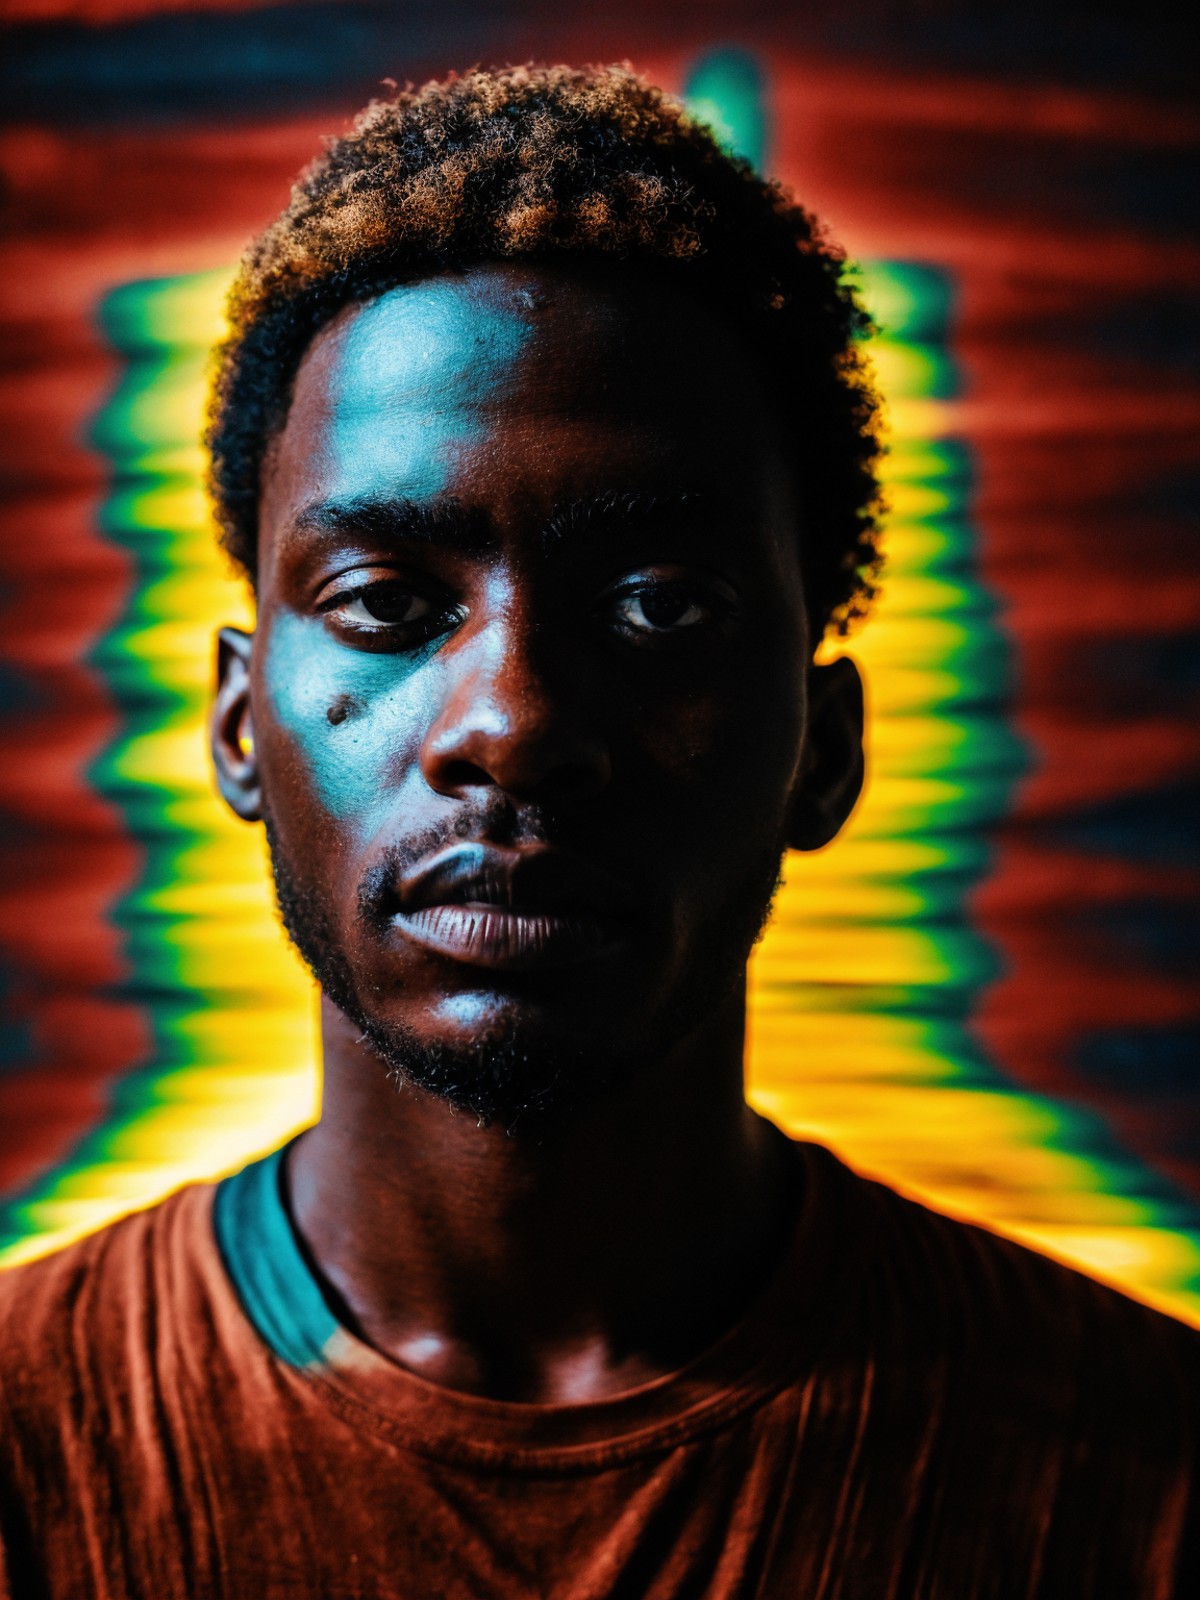 abstract digital portrait emerges bustling fusion textures light leaks, subject, african descent male discernible facial f...